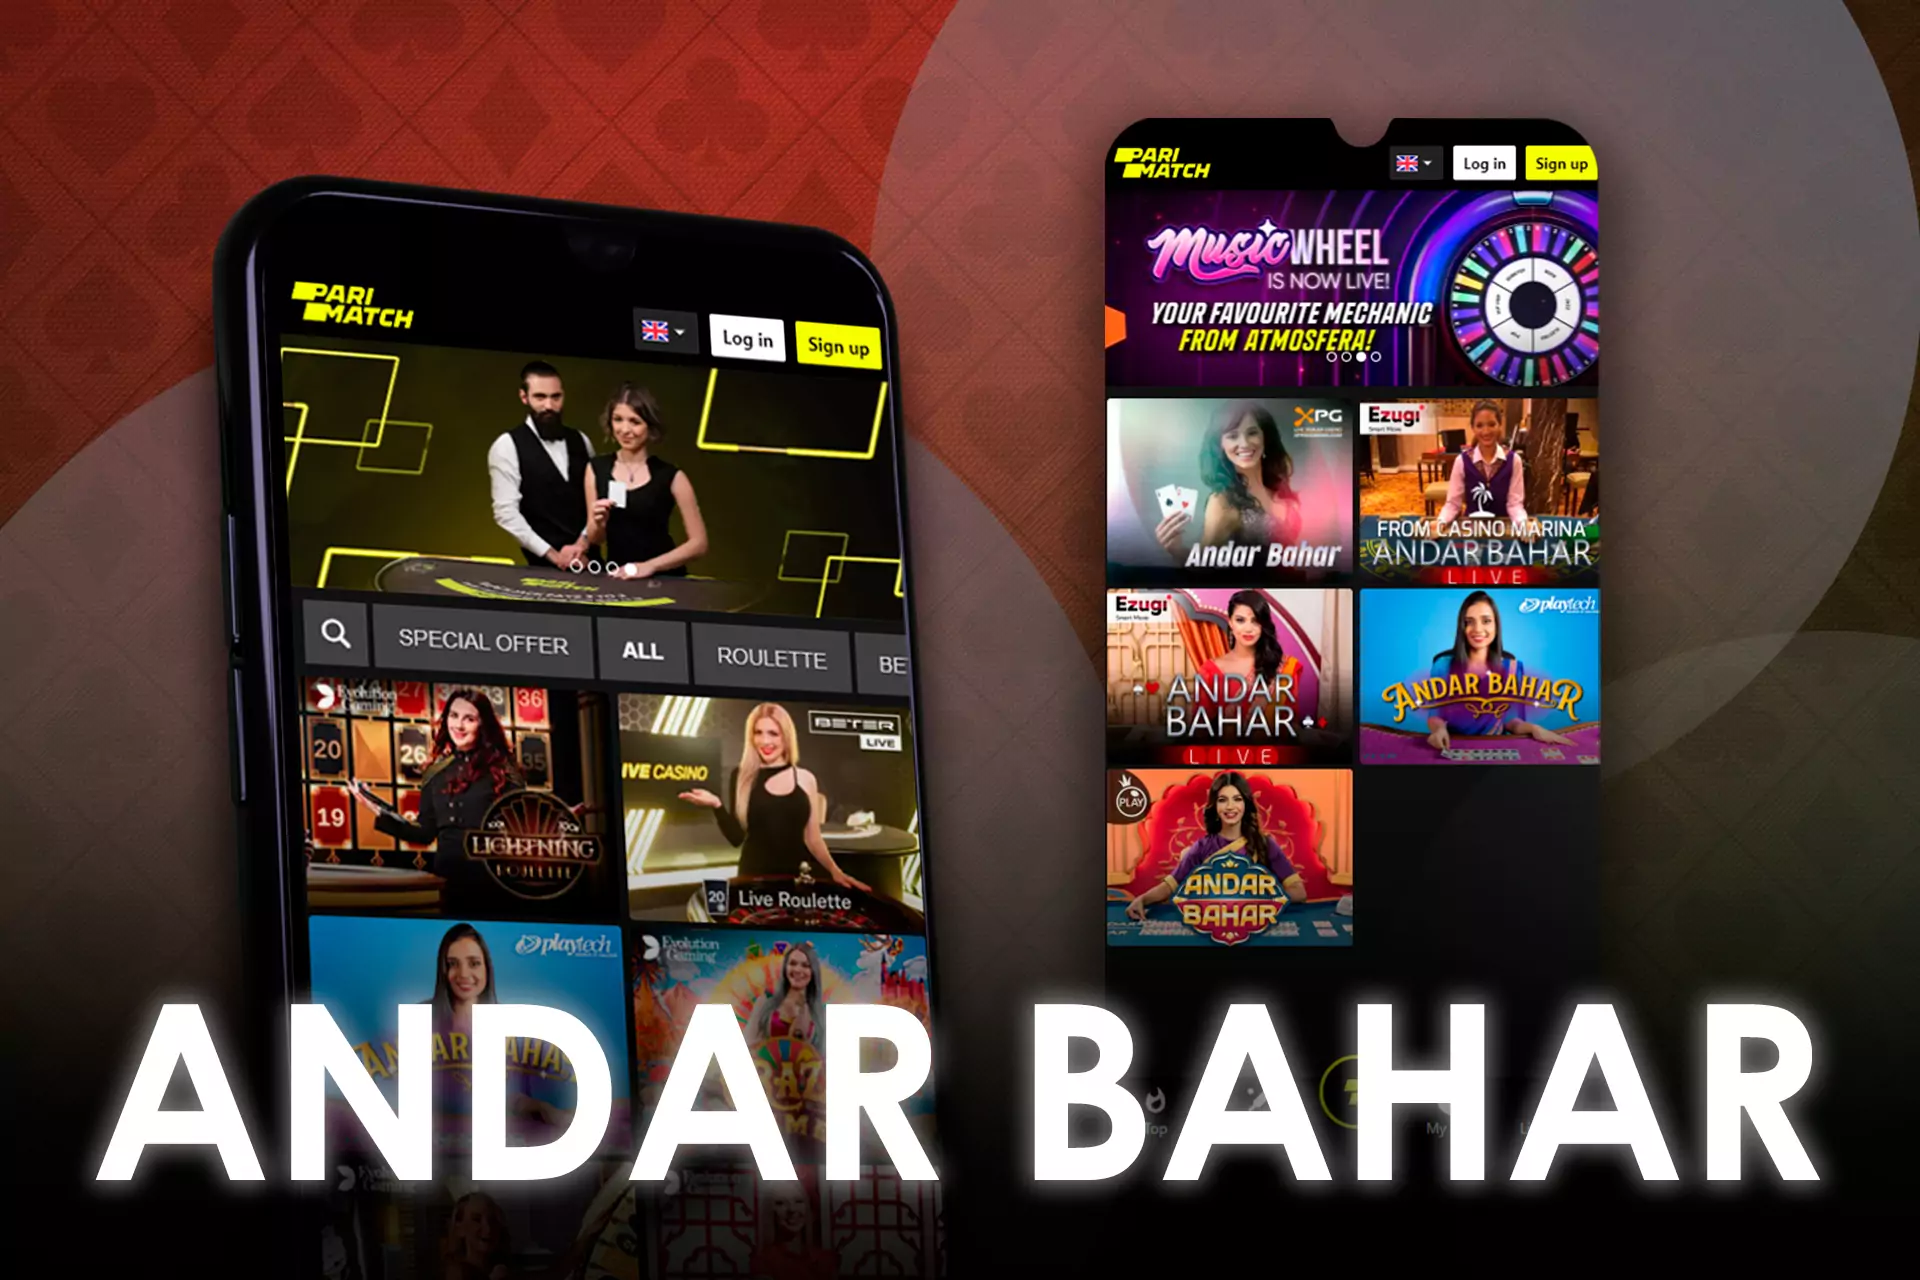 Andar Bahar is a traditional Indian card game and could be played at the Parimatch Casino as well.